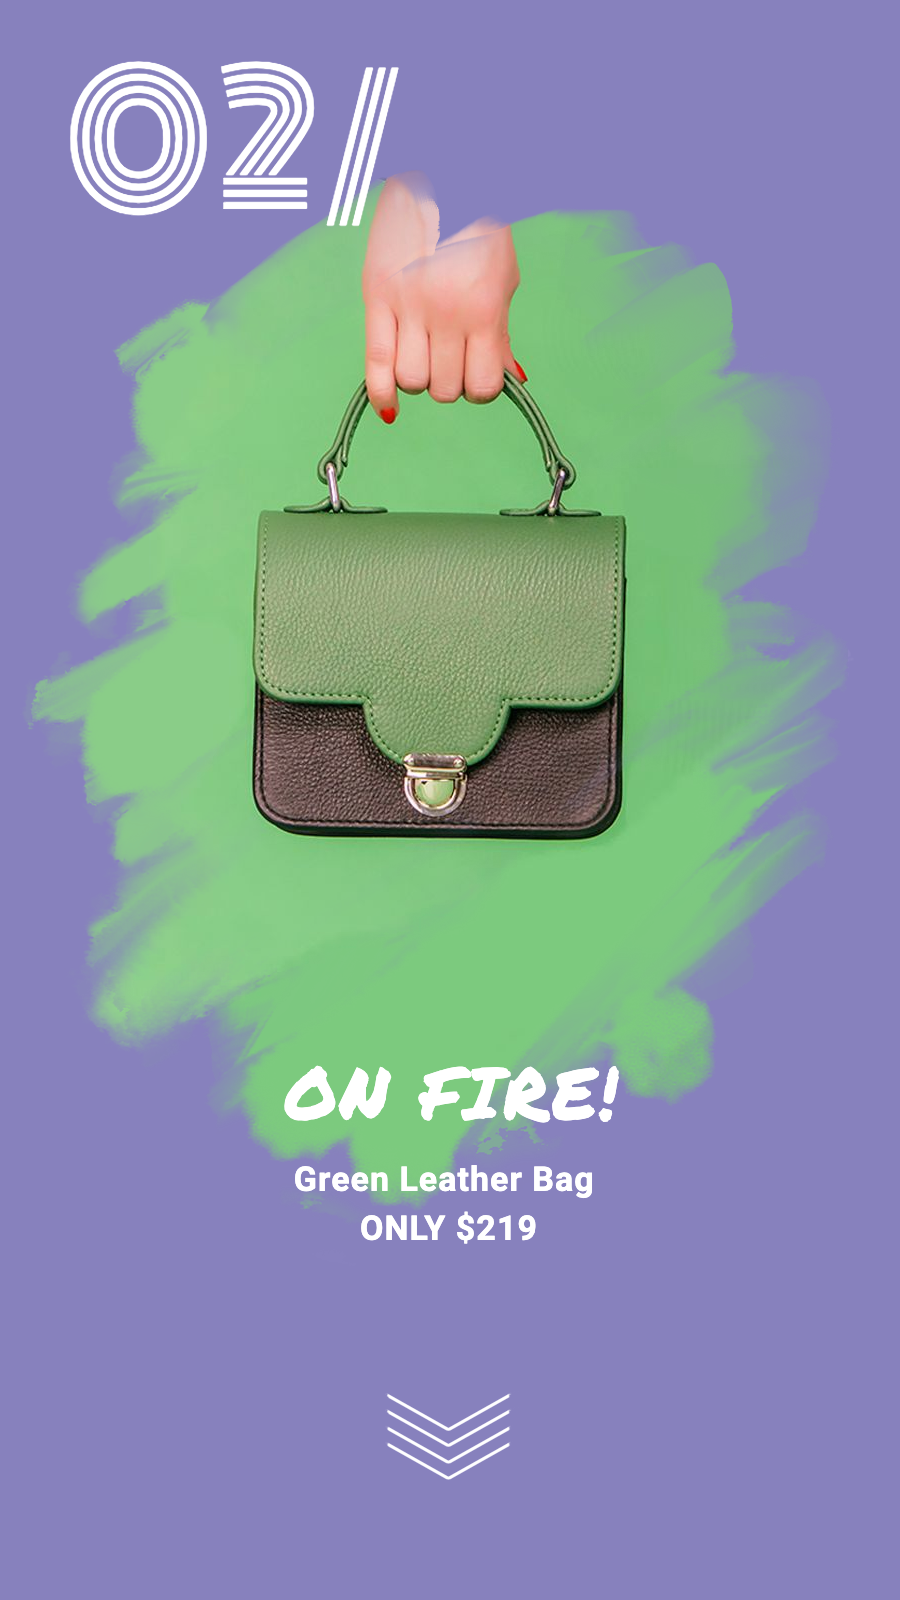 Fashion Ladies Green Leather Bag Recommendation Instagram Story预览效果